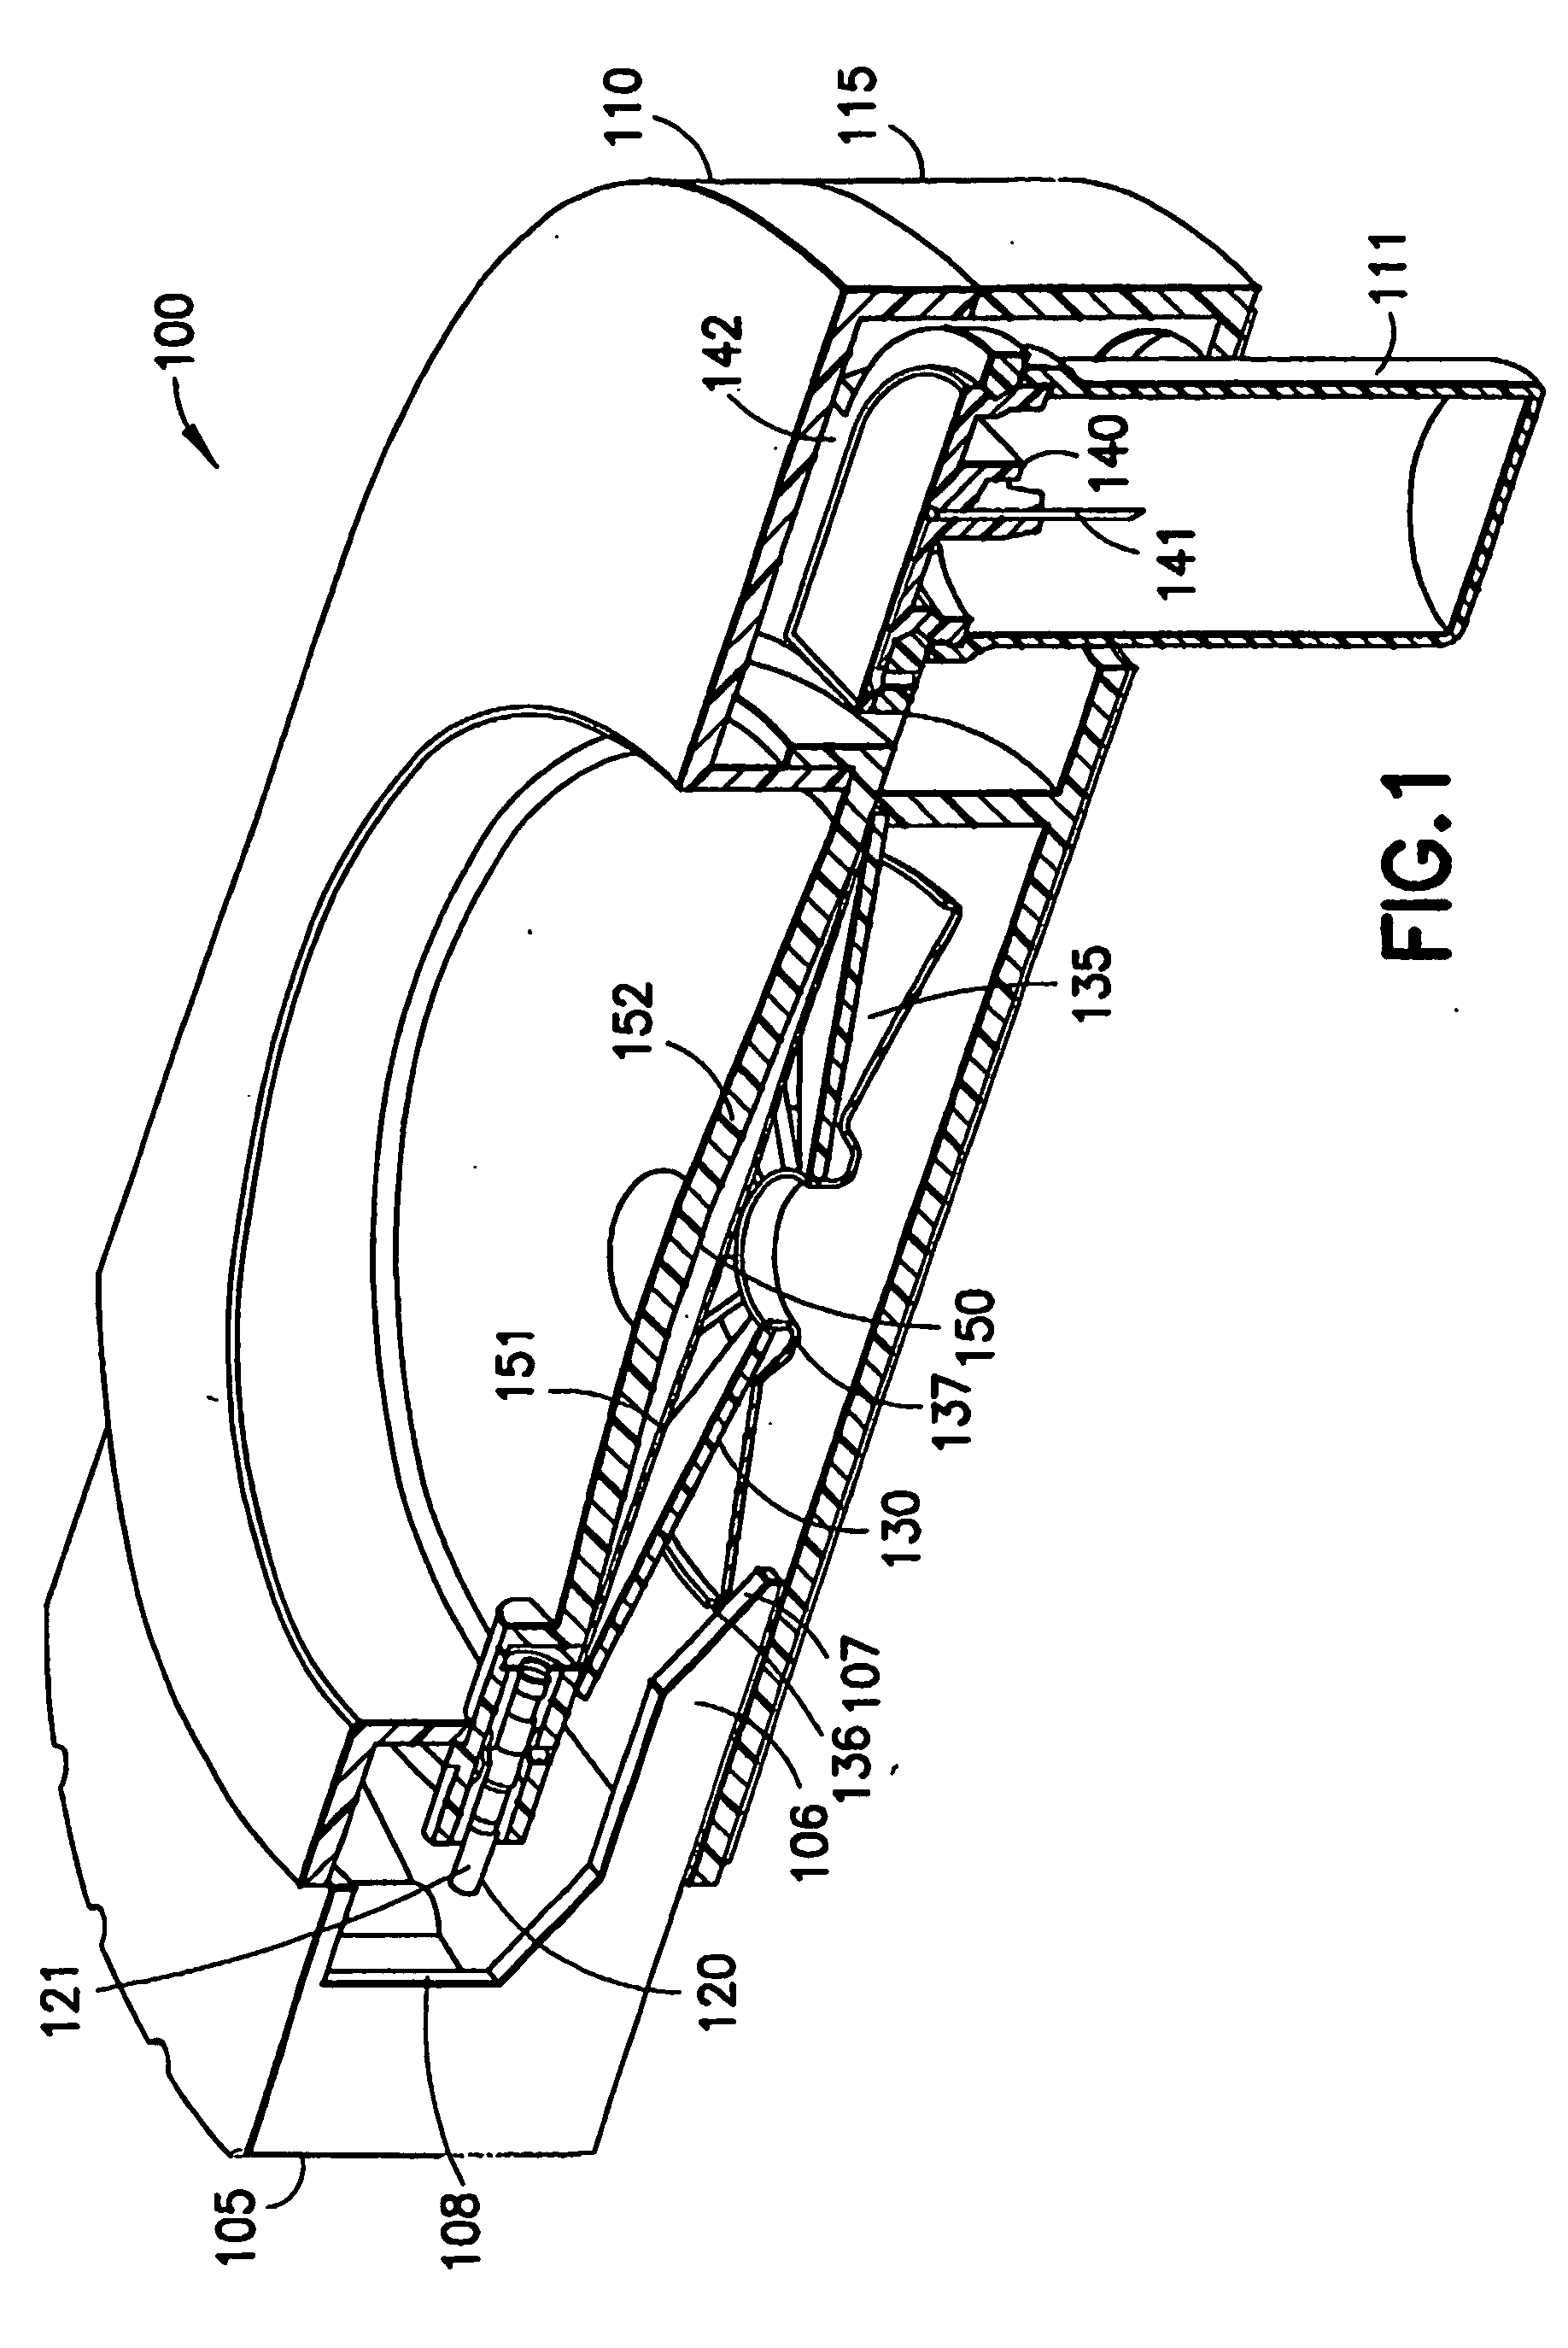 Patch-Like Infusion Device